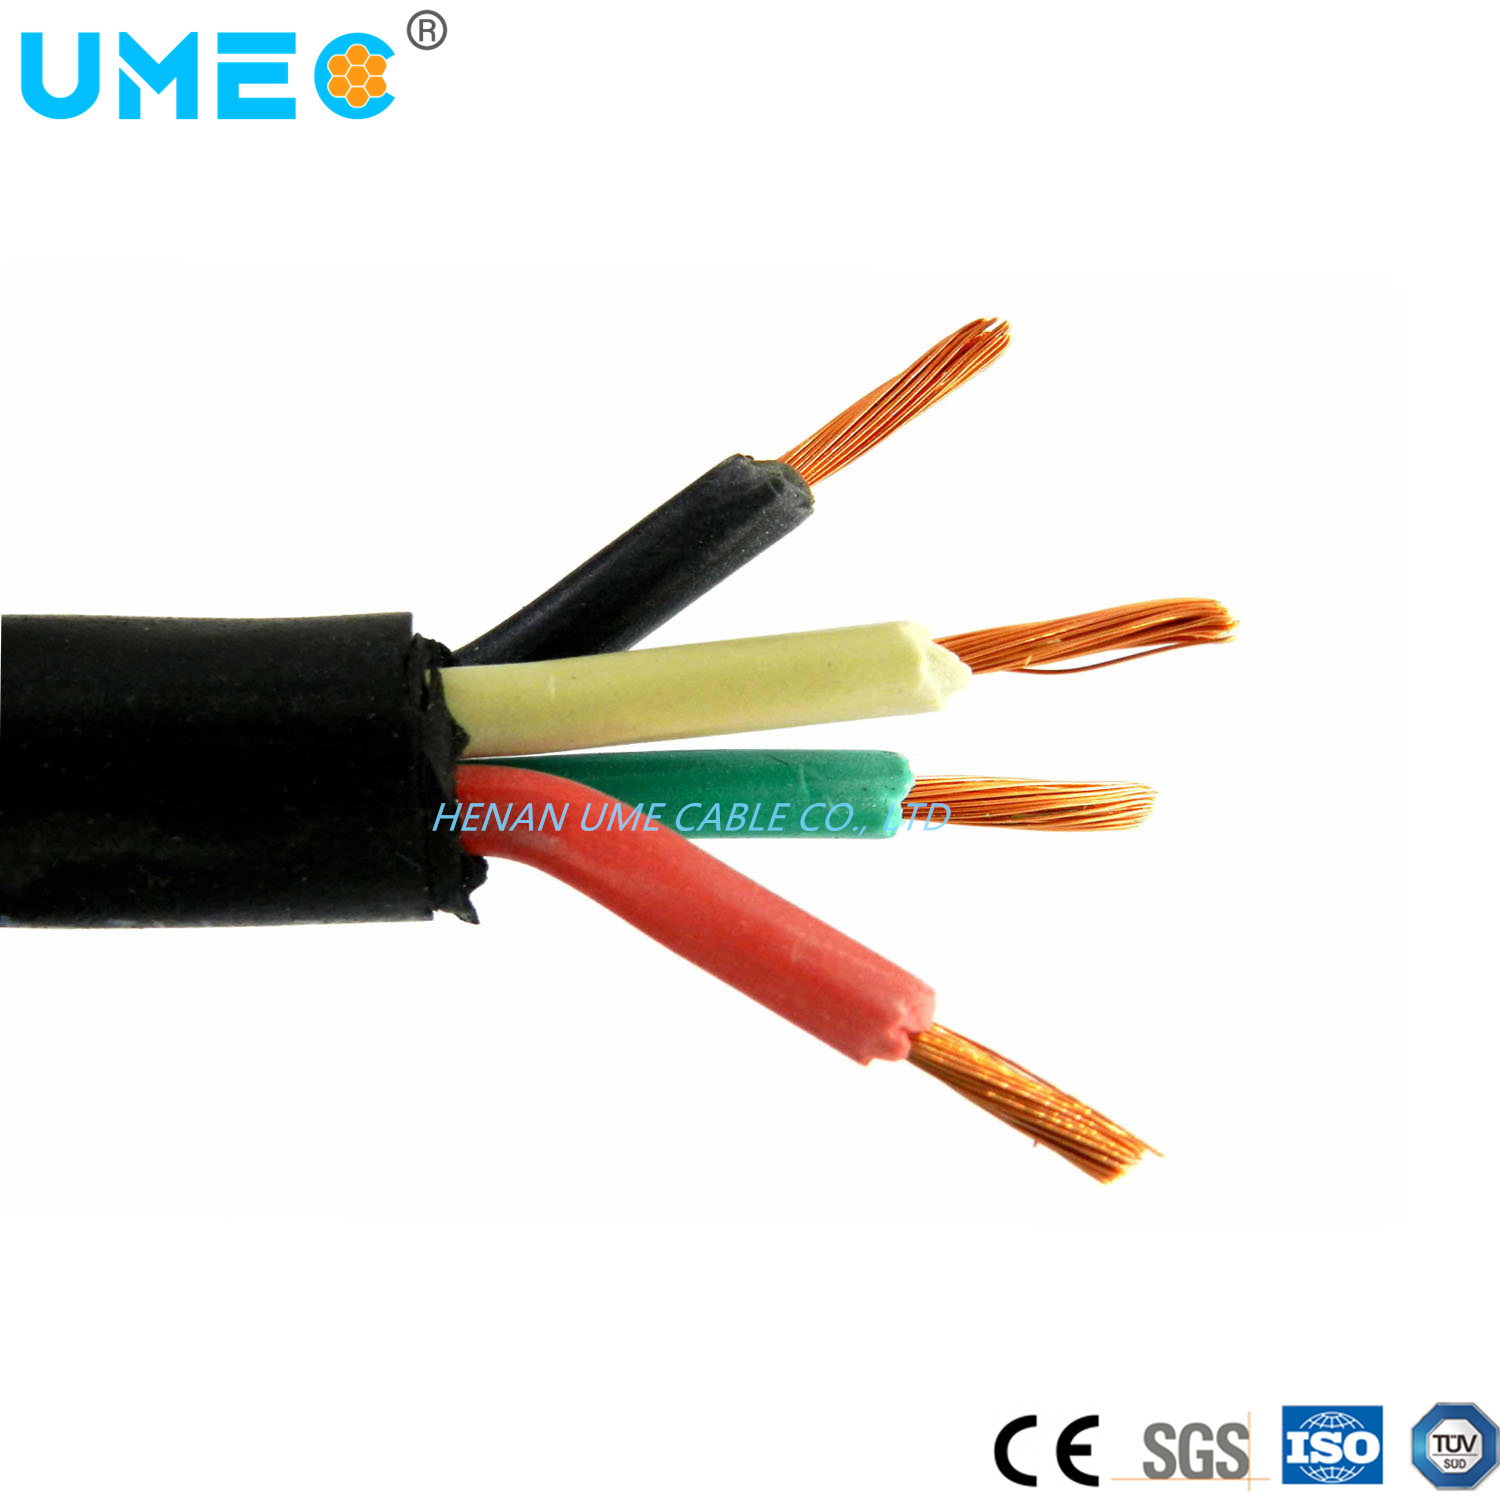 12/10/8AWG So/Sow/Soow/Sjoow 600V EPDM Rubber Cable Portable Power Cable